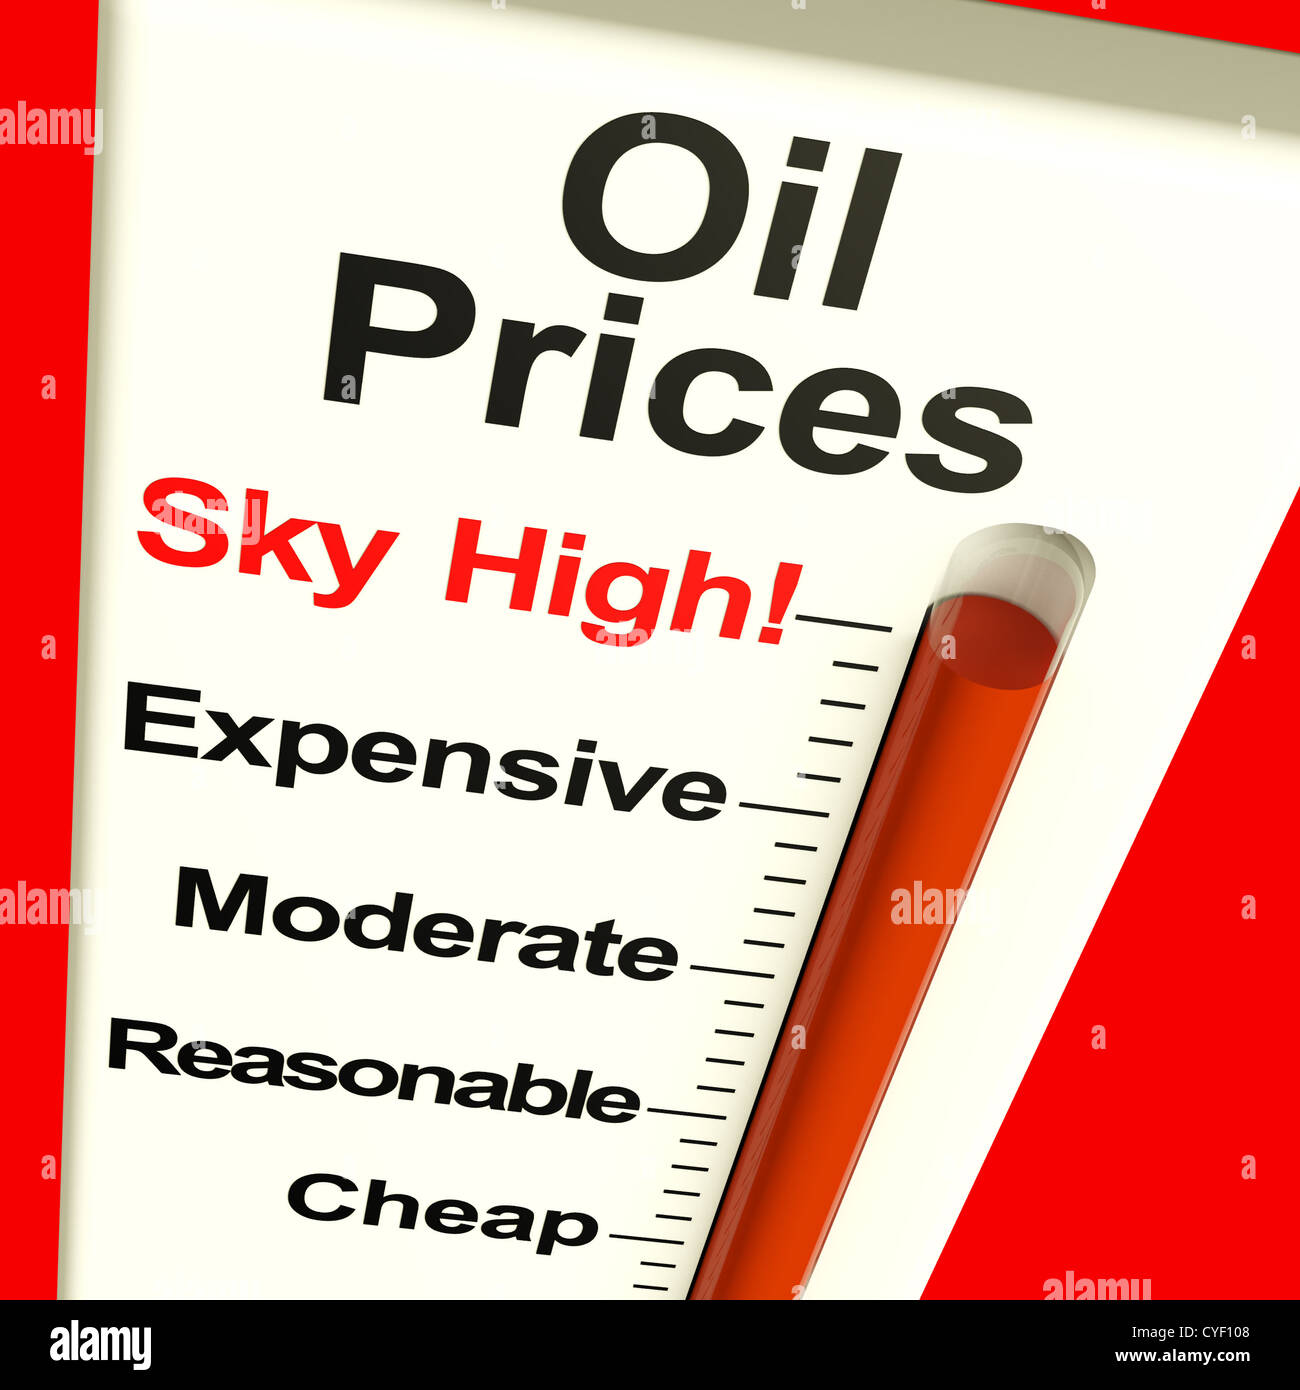 Oil Prices High Monitor Showing Expensive Fuel Cost Stock Photo